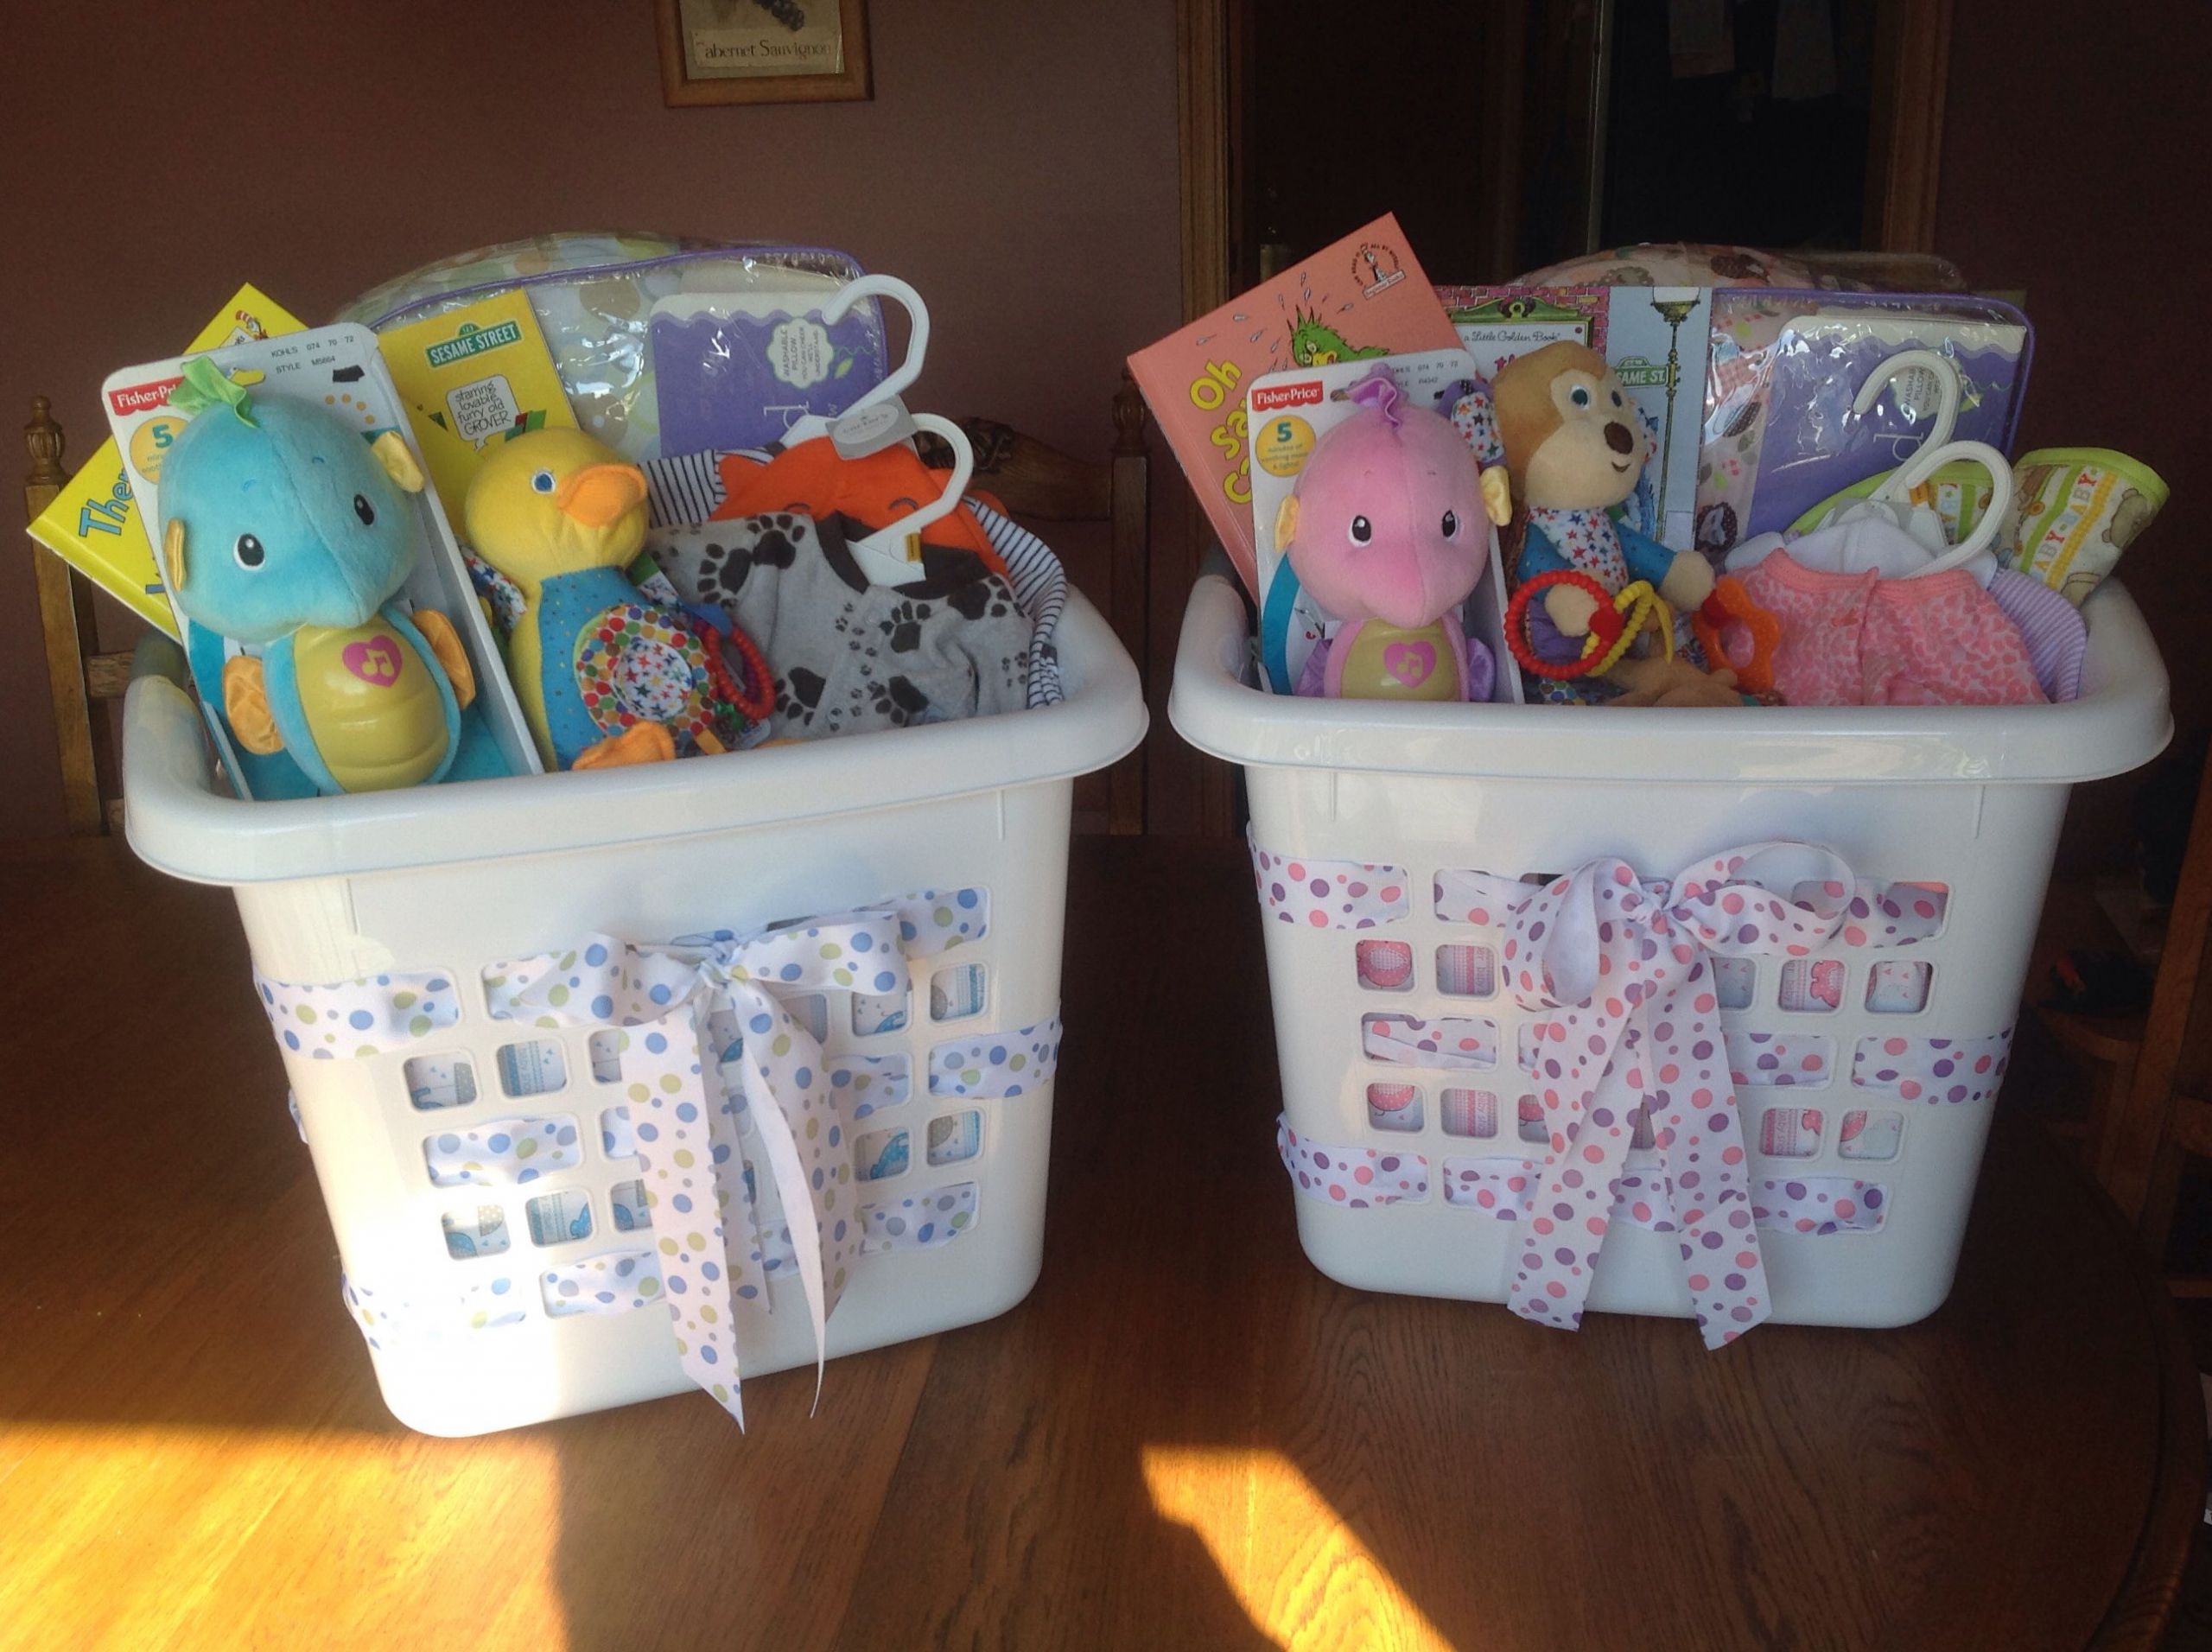 Laundry Basket Gift Ideas
 Use laundry basket as "Gift Bag" for Baby Shower ts I